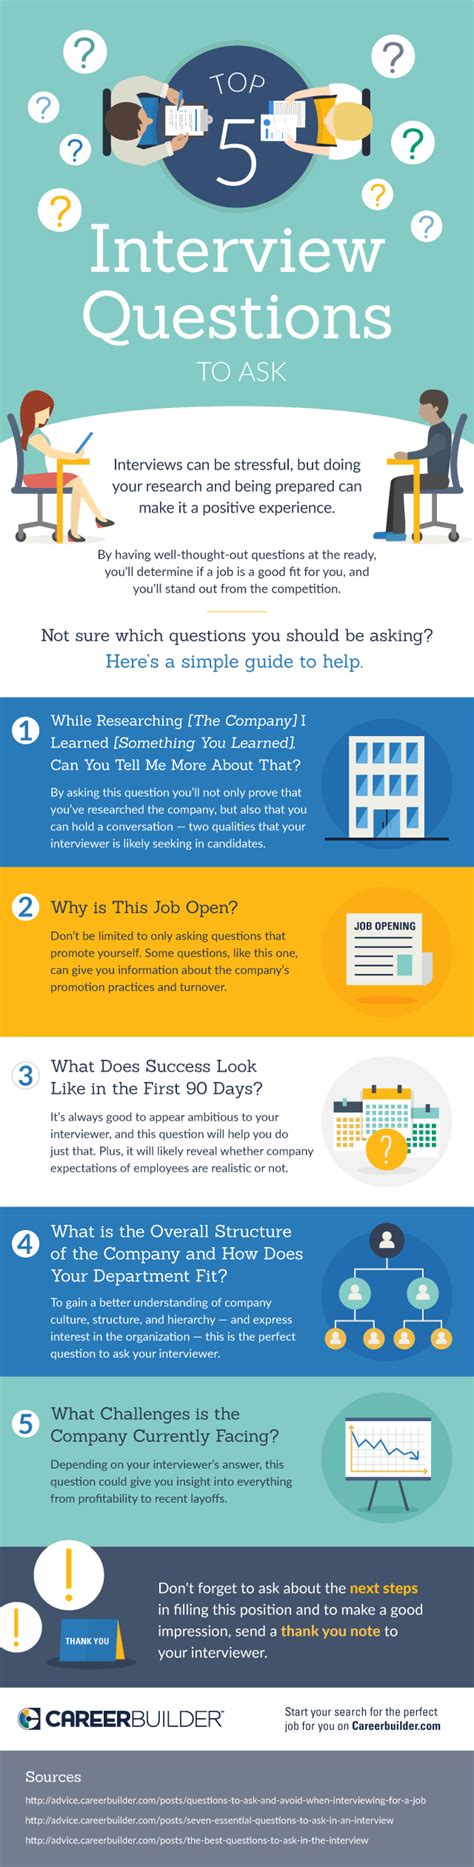 Top 5 Interview Questions To Ask Infographic Visualistan